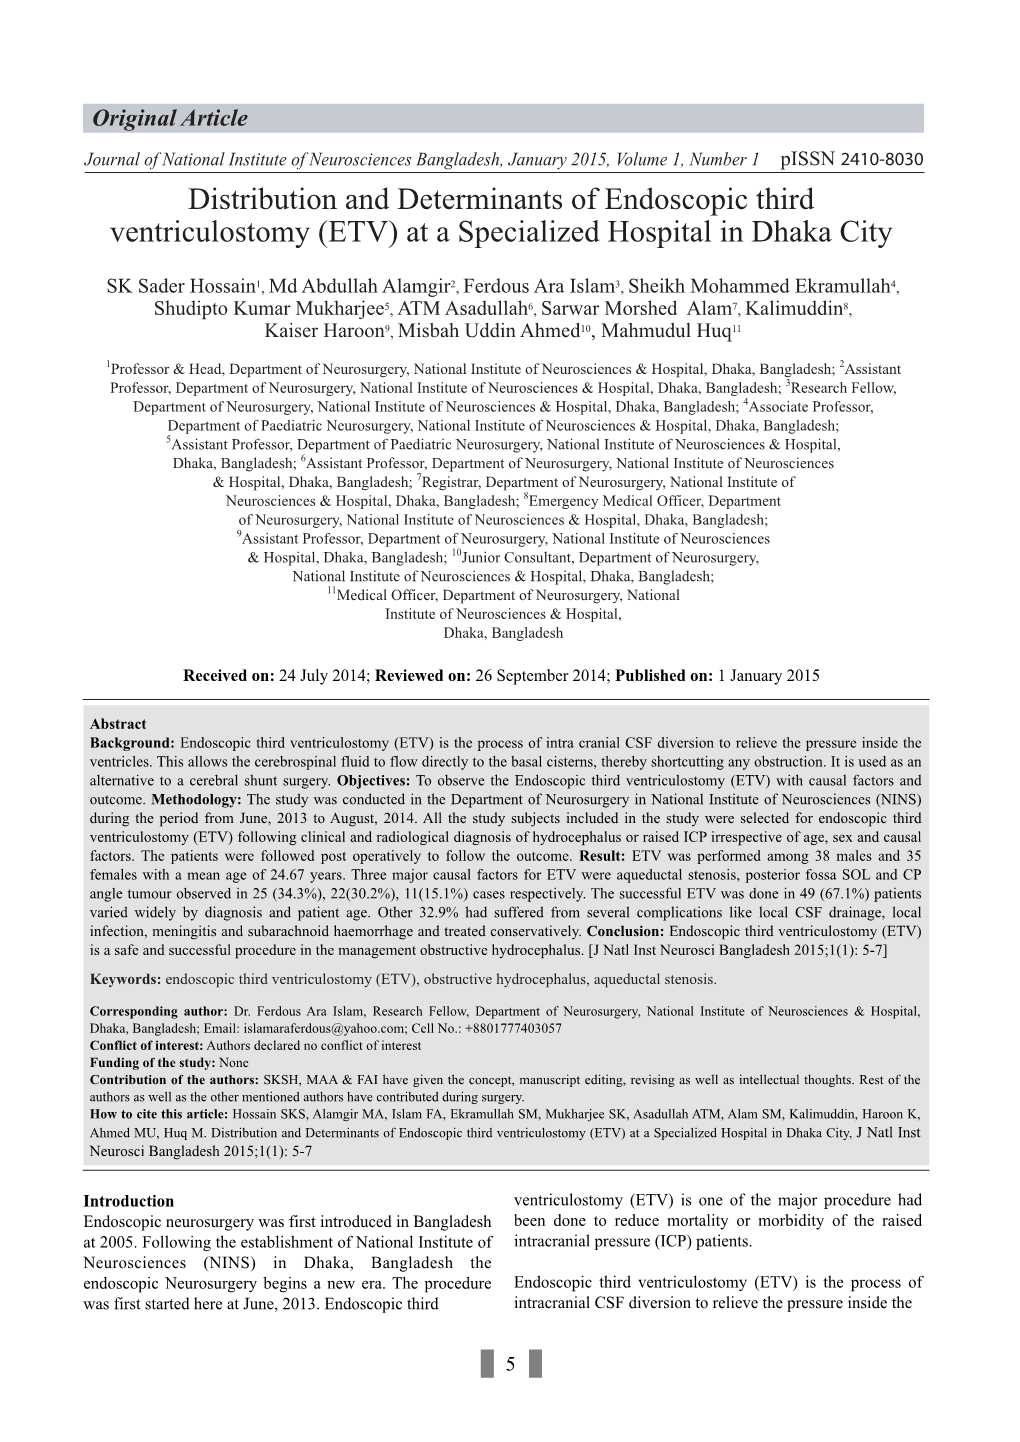 Distribution and Determinants of Endoscopic Third Ventriculostomy (ETV) at a Specialized Hospital in Dhaka City